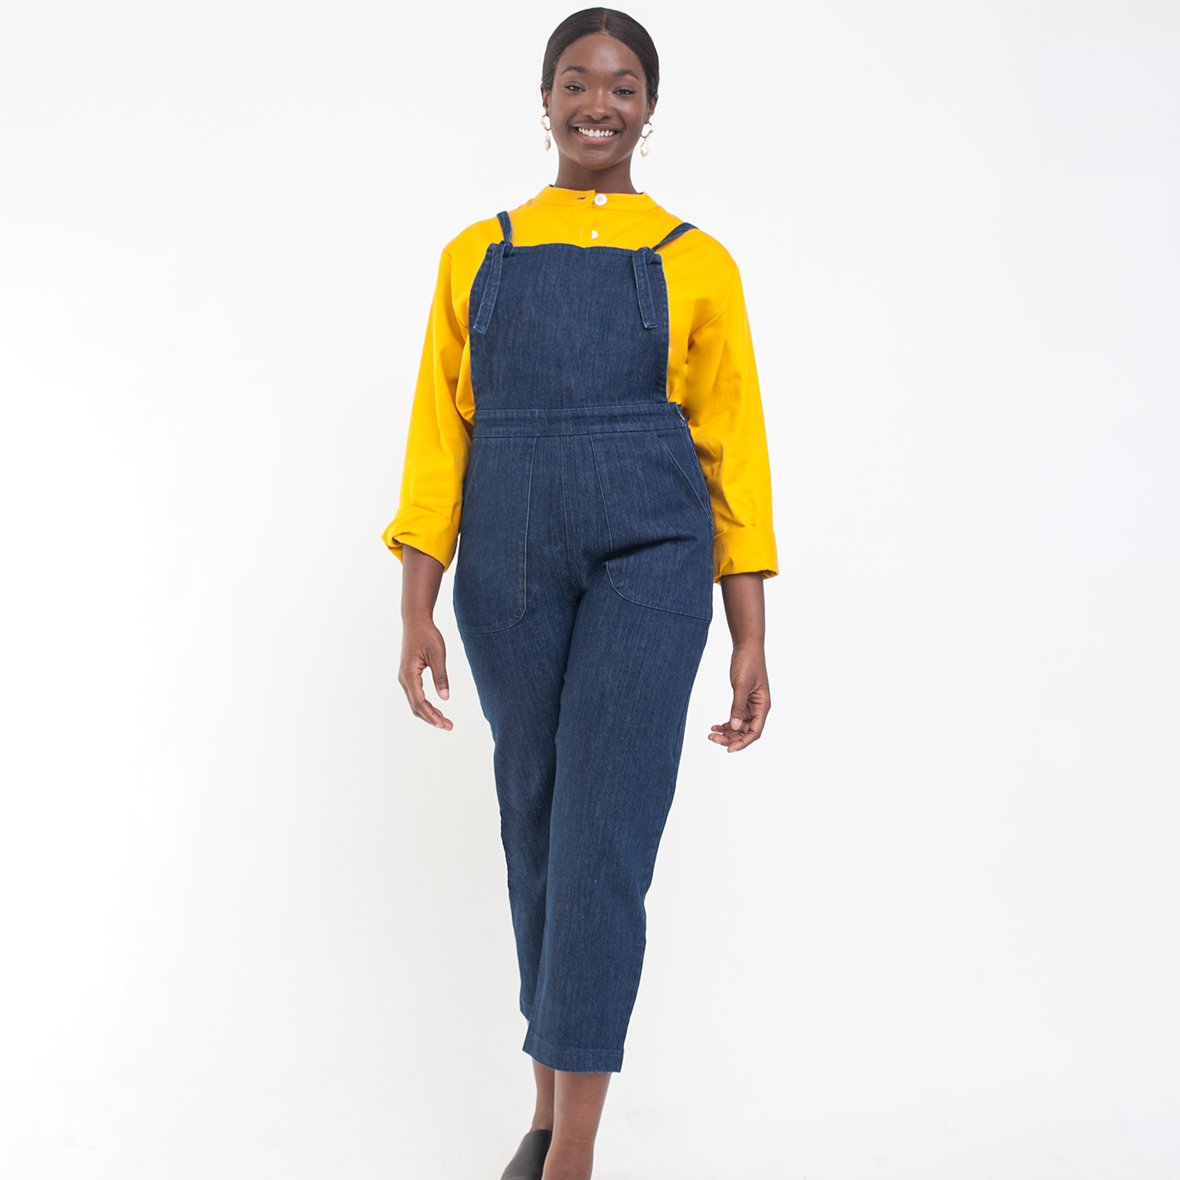 Model wears dark blue cropped overalls with thin adjustable straps and two front pockets over a long sleeve yellow shirt. The Knot Overalls in Dark Indigo are designed by Loup and made in New York City, NY.